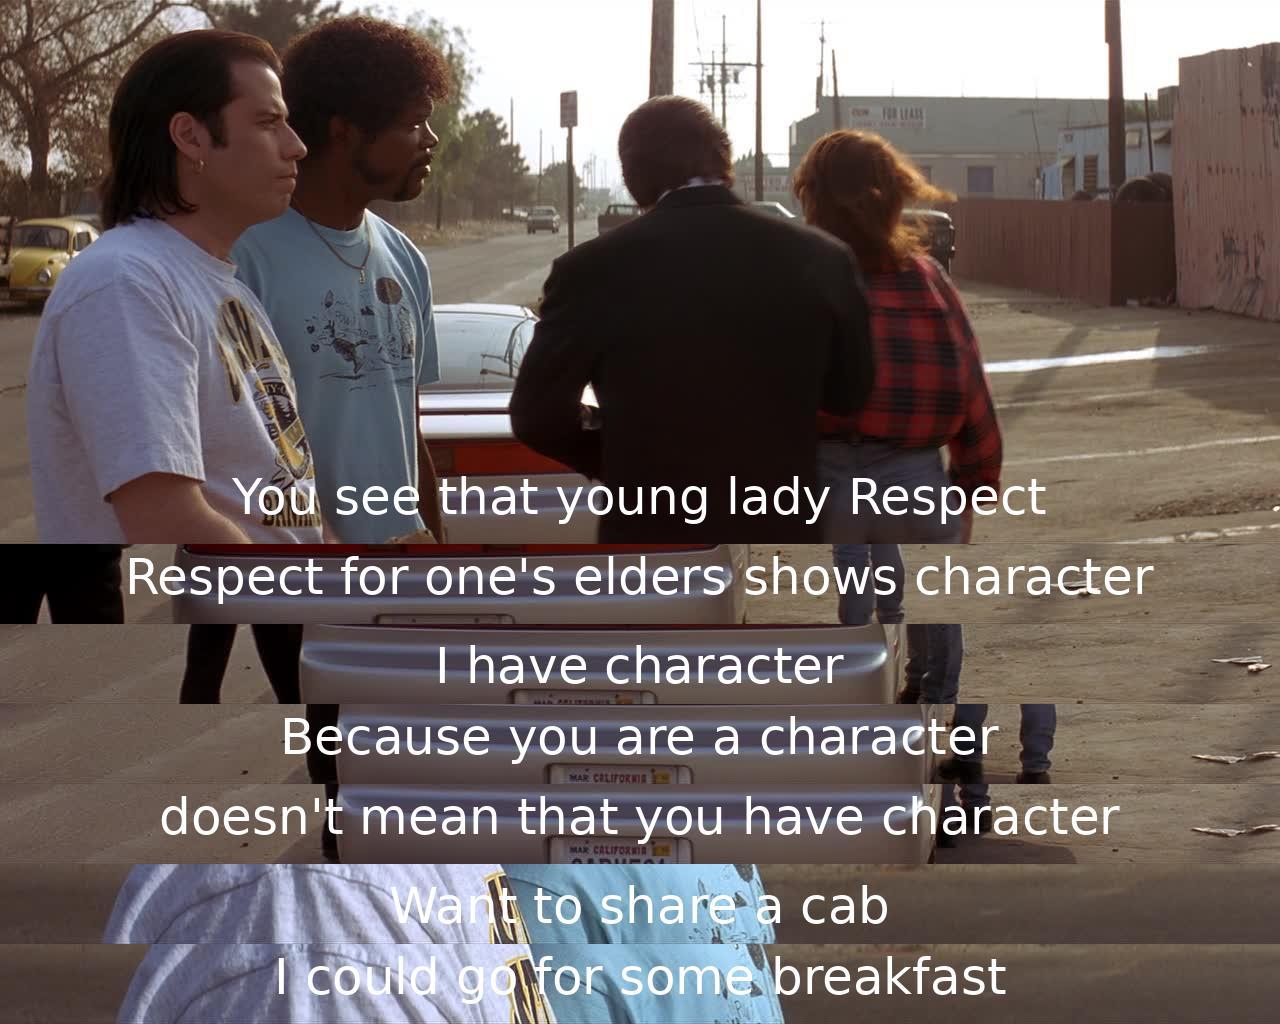 Two characters discuss respect, character, and breakfast. One character asserts having character, while the other suggests being a character doesn't guarantee having character. They consider sharing a cab for breakfast.